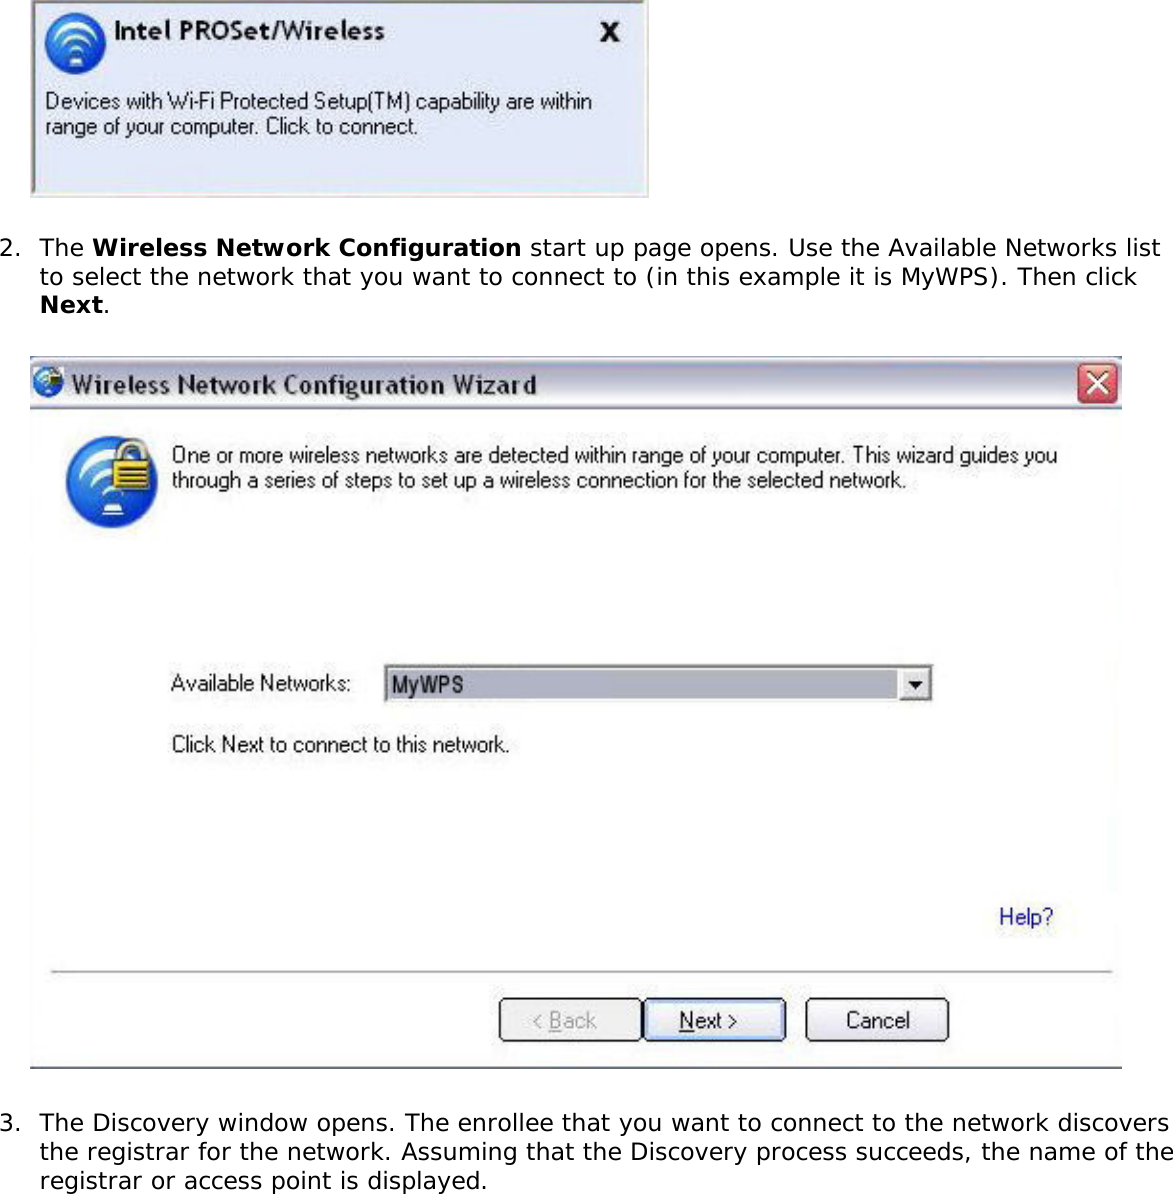 2.  The Wireless Network Configuration start up page opens. Use the Available Networks list to select the network that you want to connect to (in this example it is MyWPS). Then click Next.  3.  The Discovery window opens. The enrollee that you want to connect to the network discovers the registrar for the network. Assuming that the Discovery process succeeds, the name of the registrar or access point is displayed.